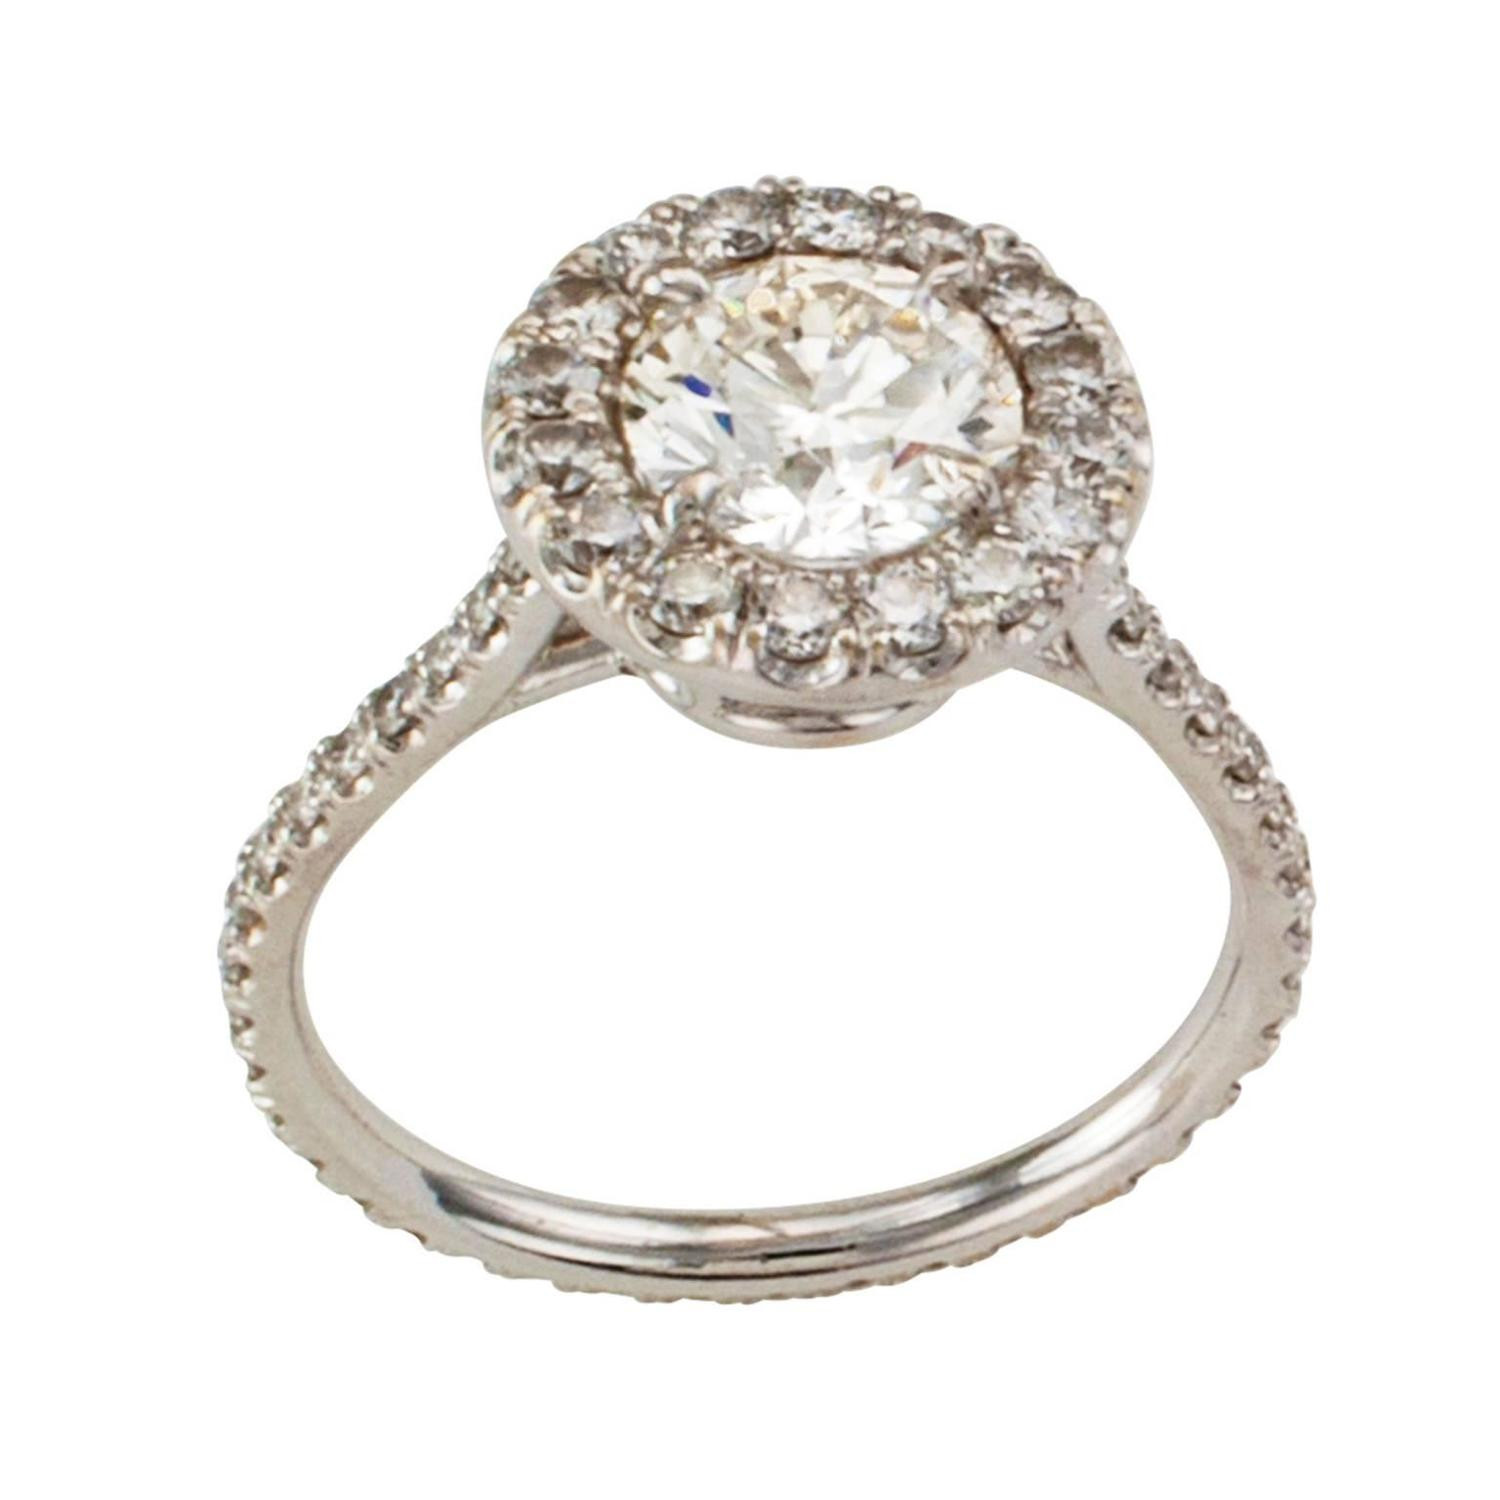 Diamond Rings For Sale
 Diamond Halo Engagement Ring For Sale at 1stdibs